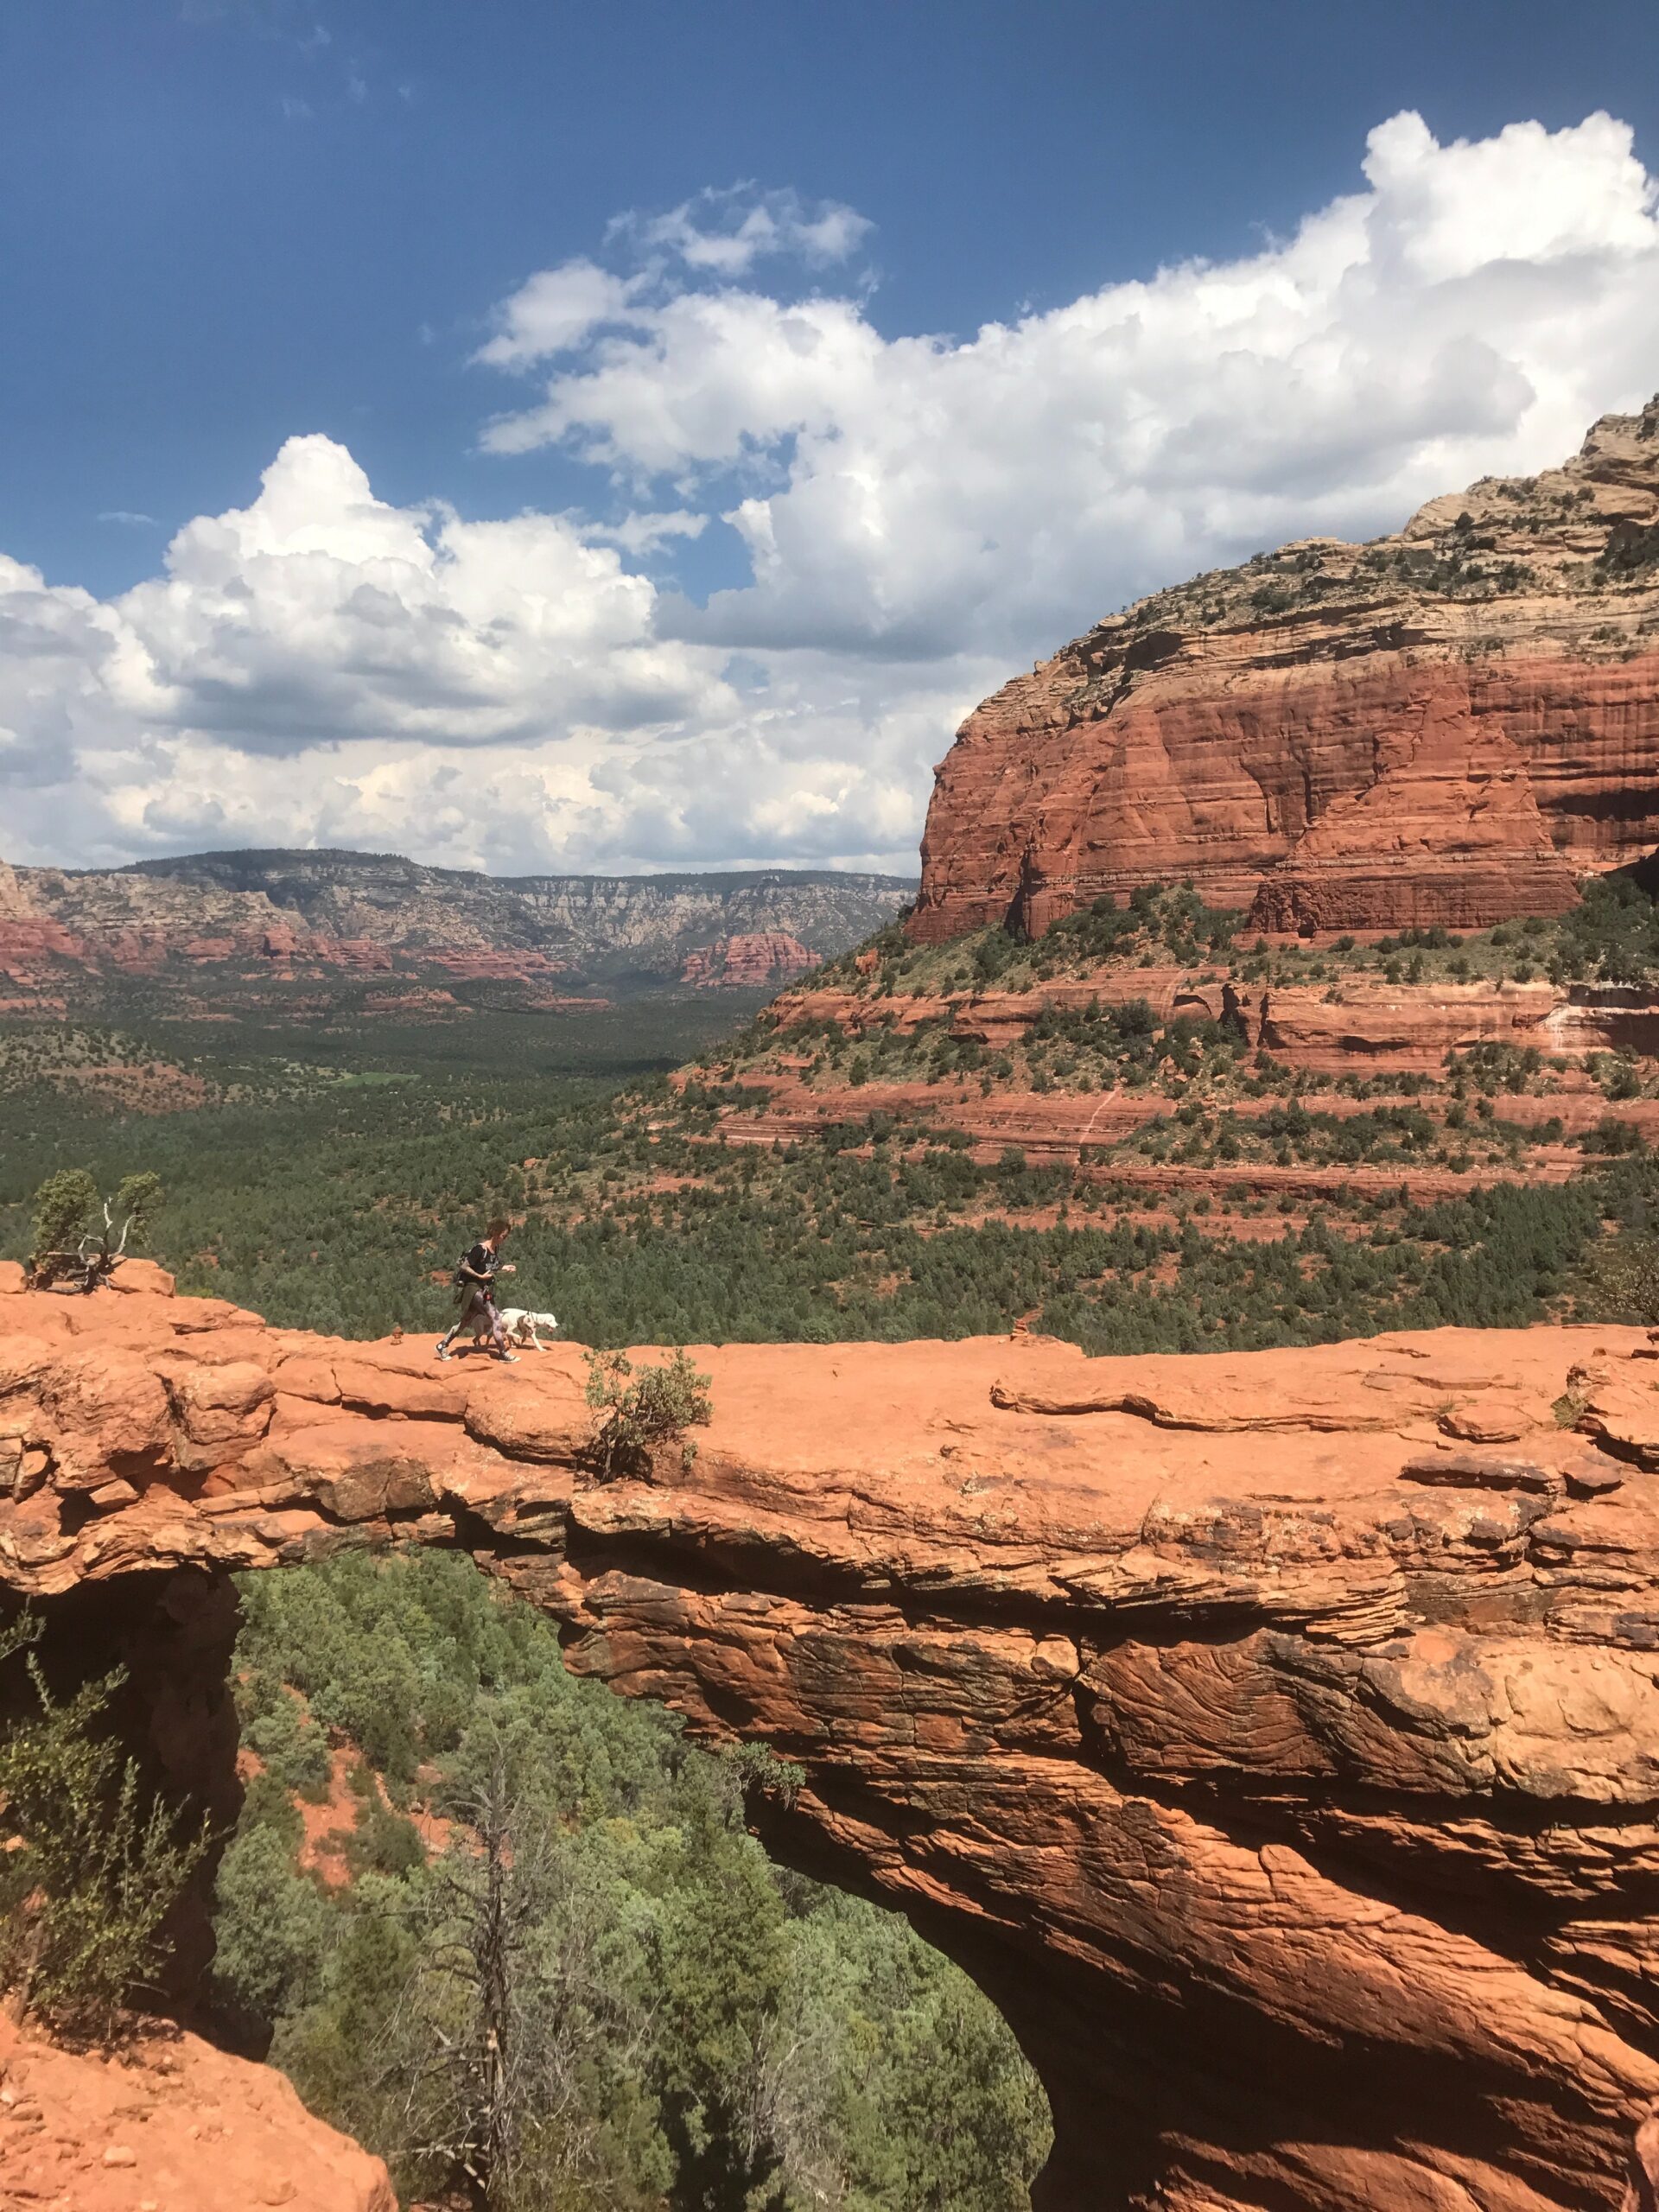 An aerial view of a man and his dog hiking in Sedona